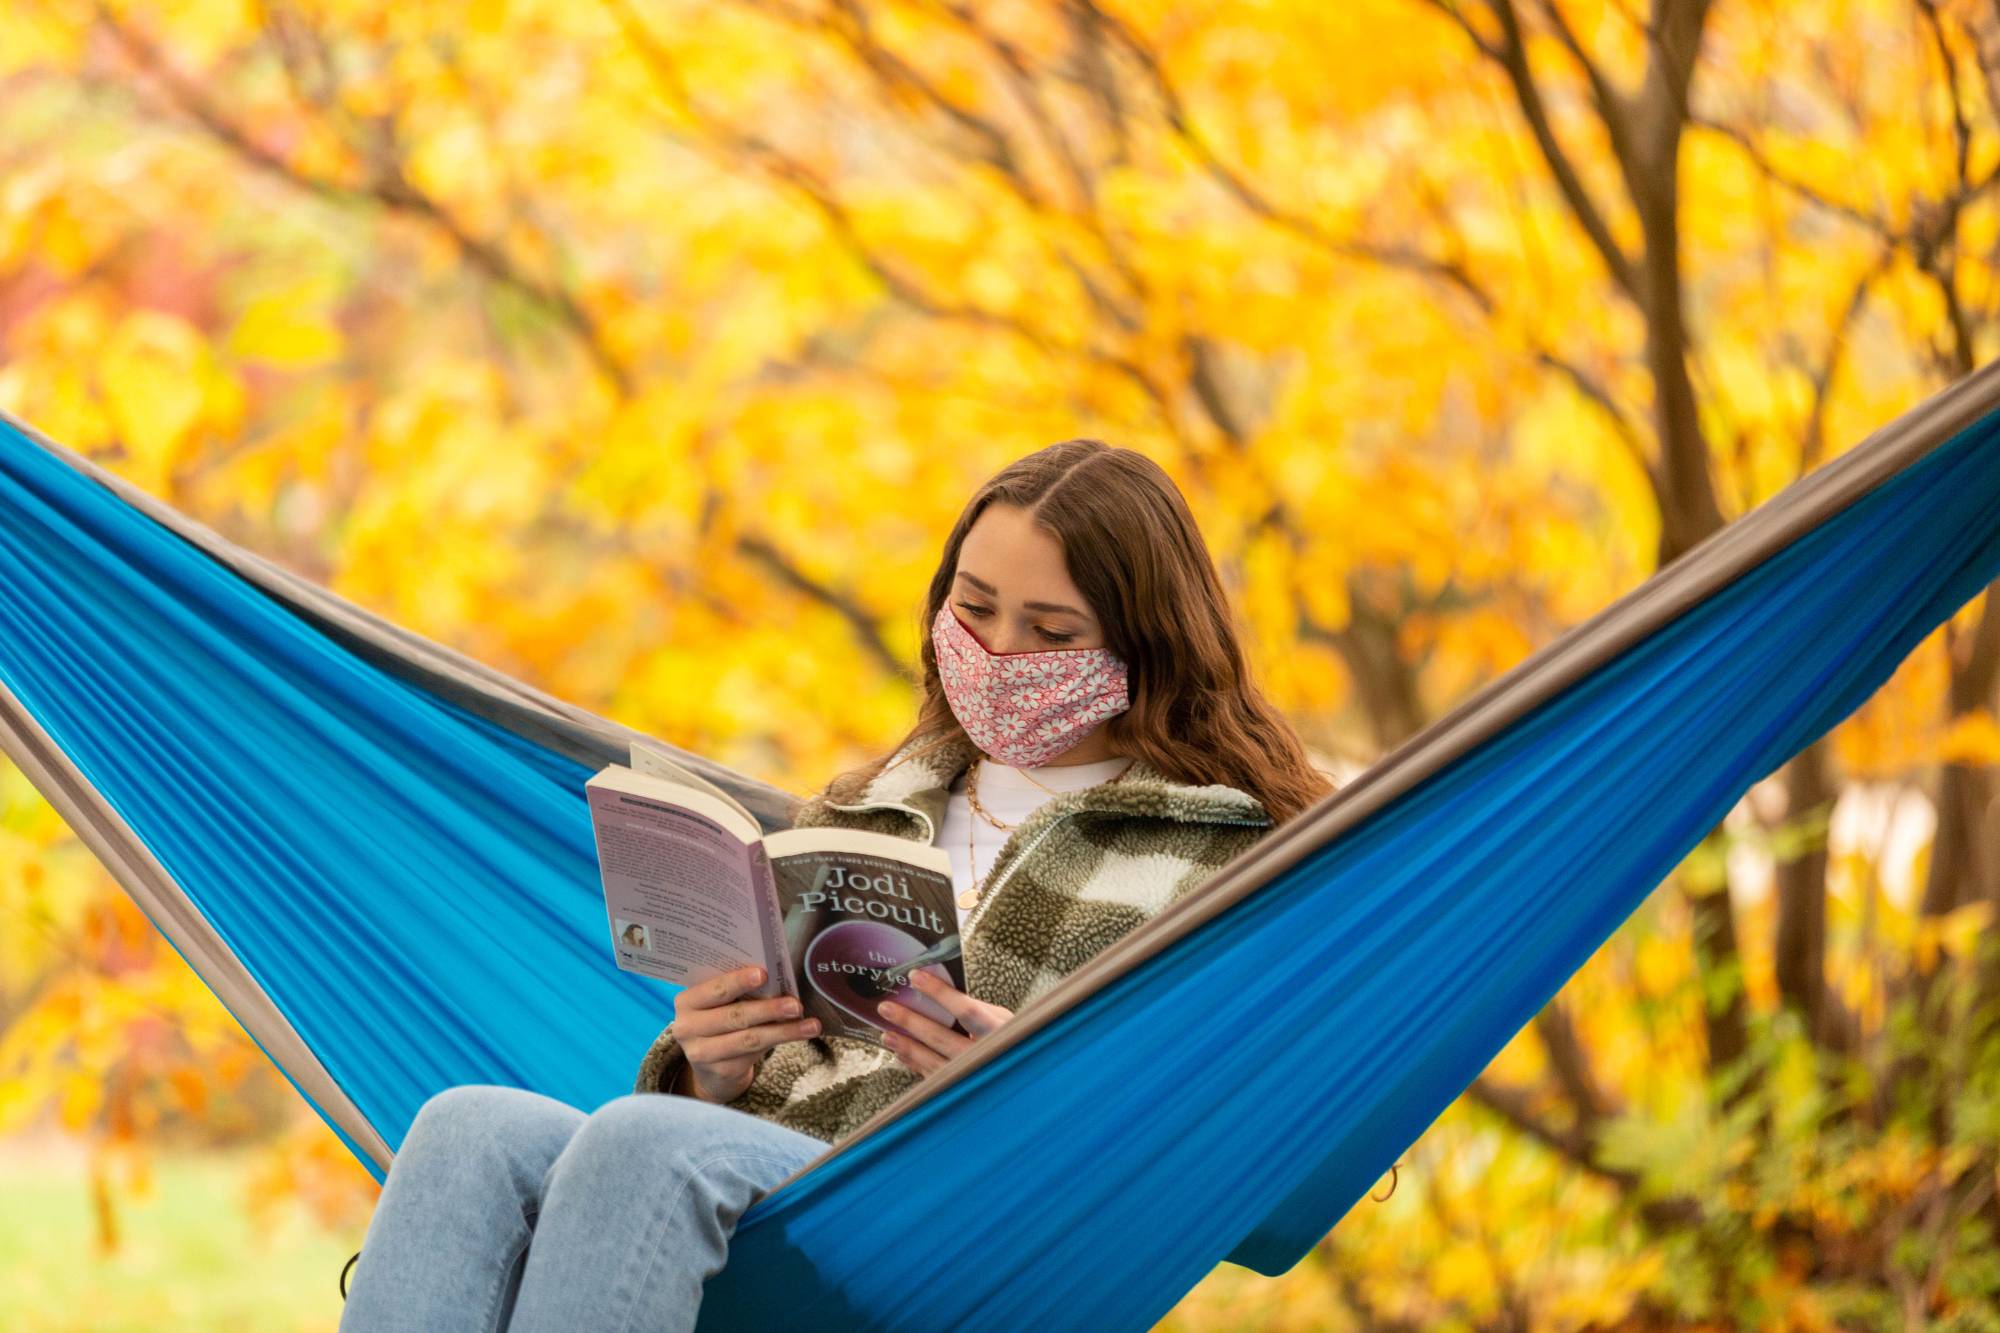 Student reading a book in a hammock.